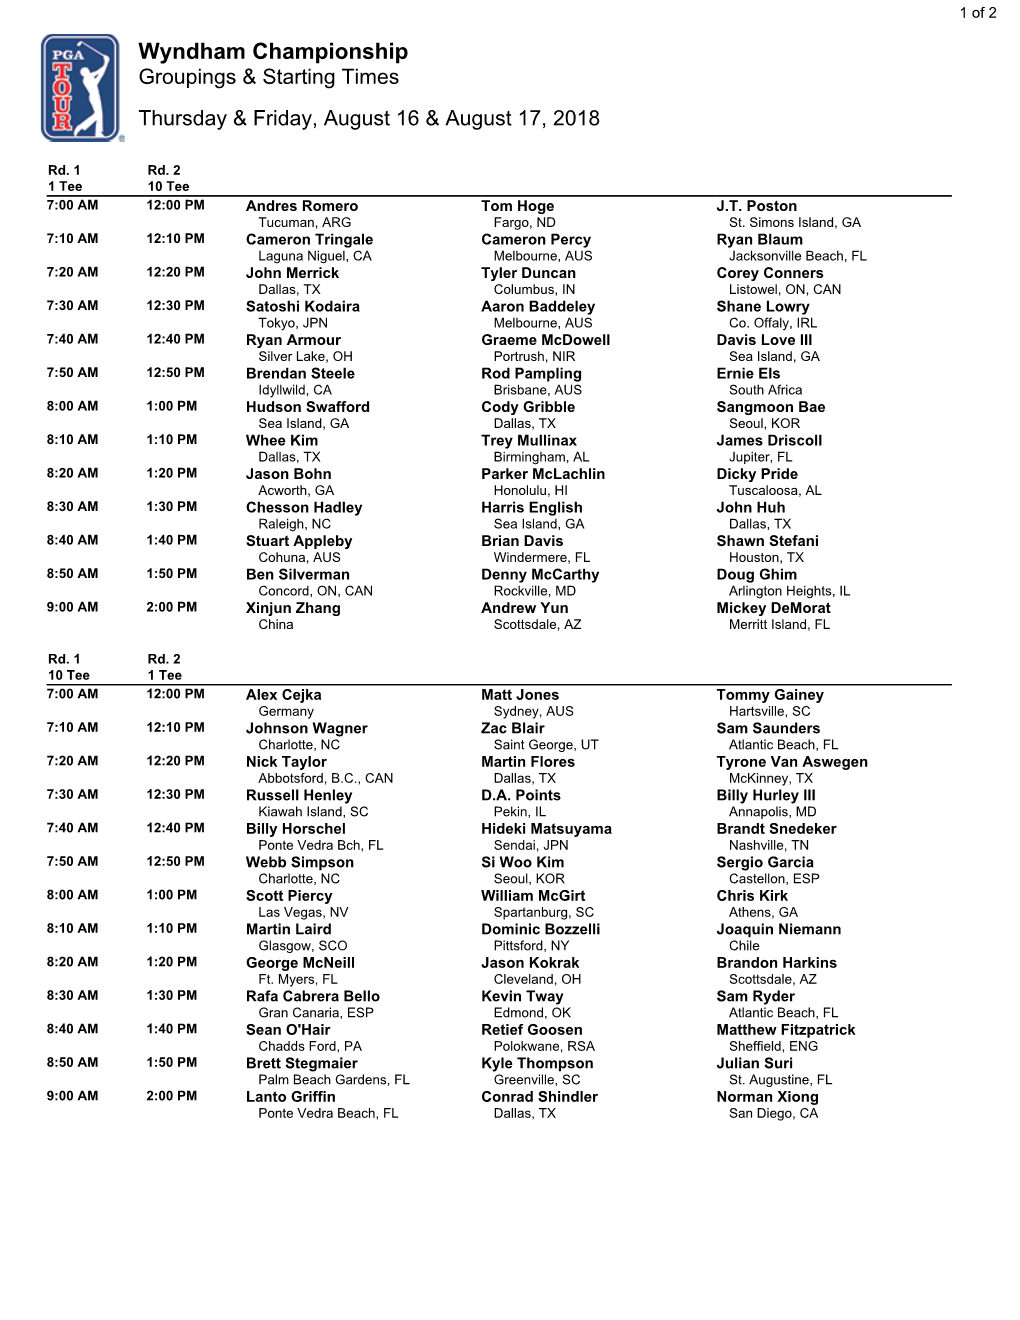 Wyndham Championship Groupings & Starting Times Thursday & Friday, August 16 & August 17, 2018